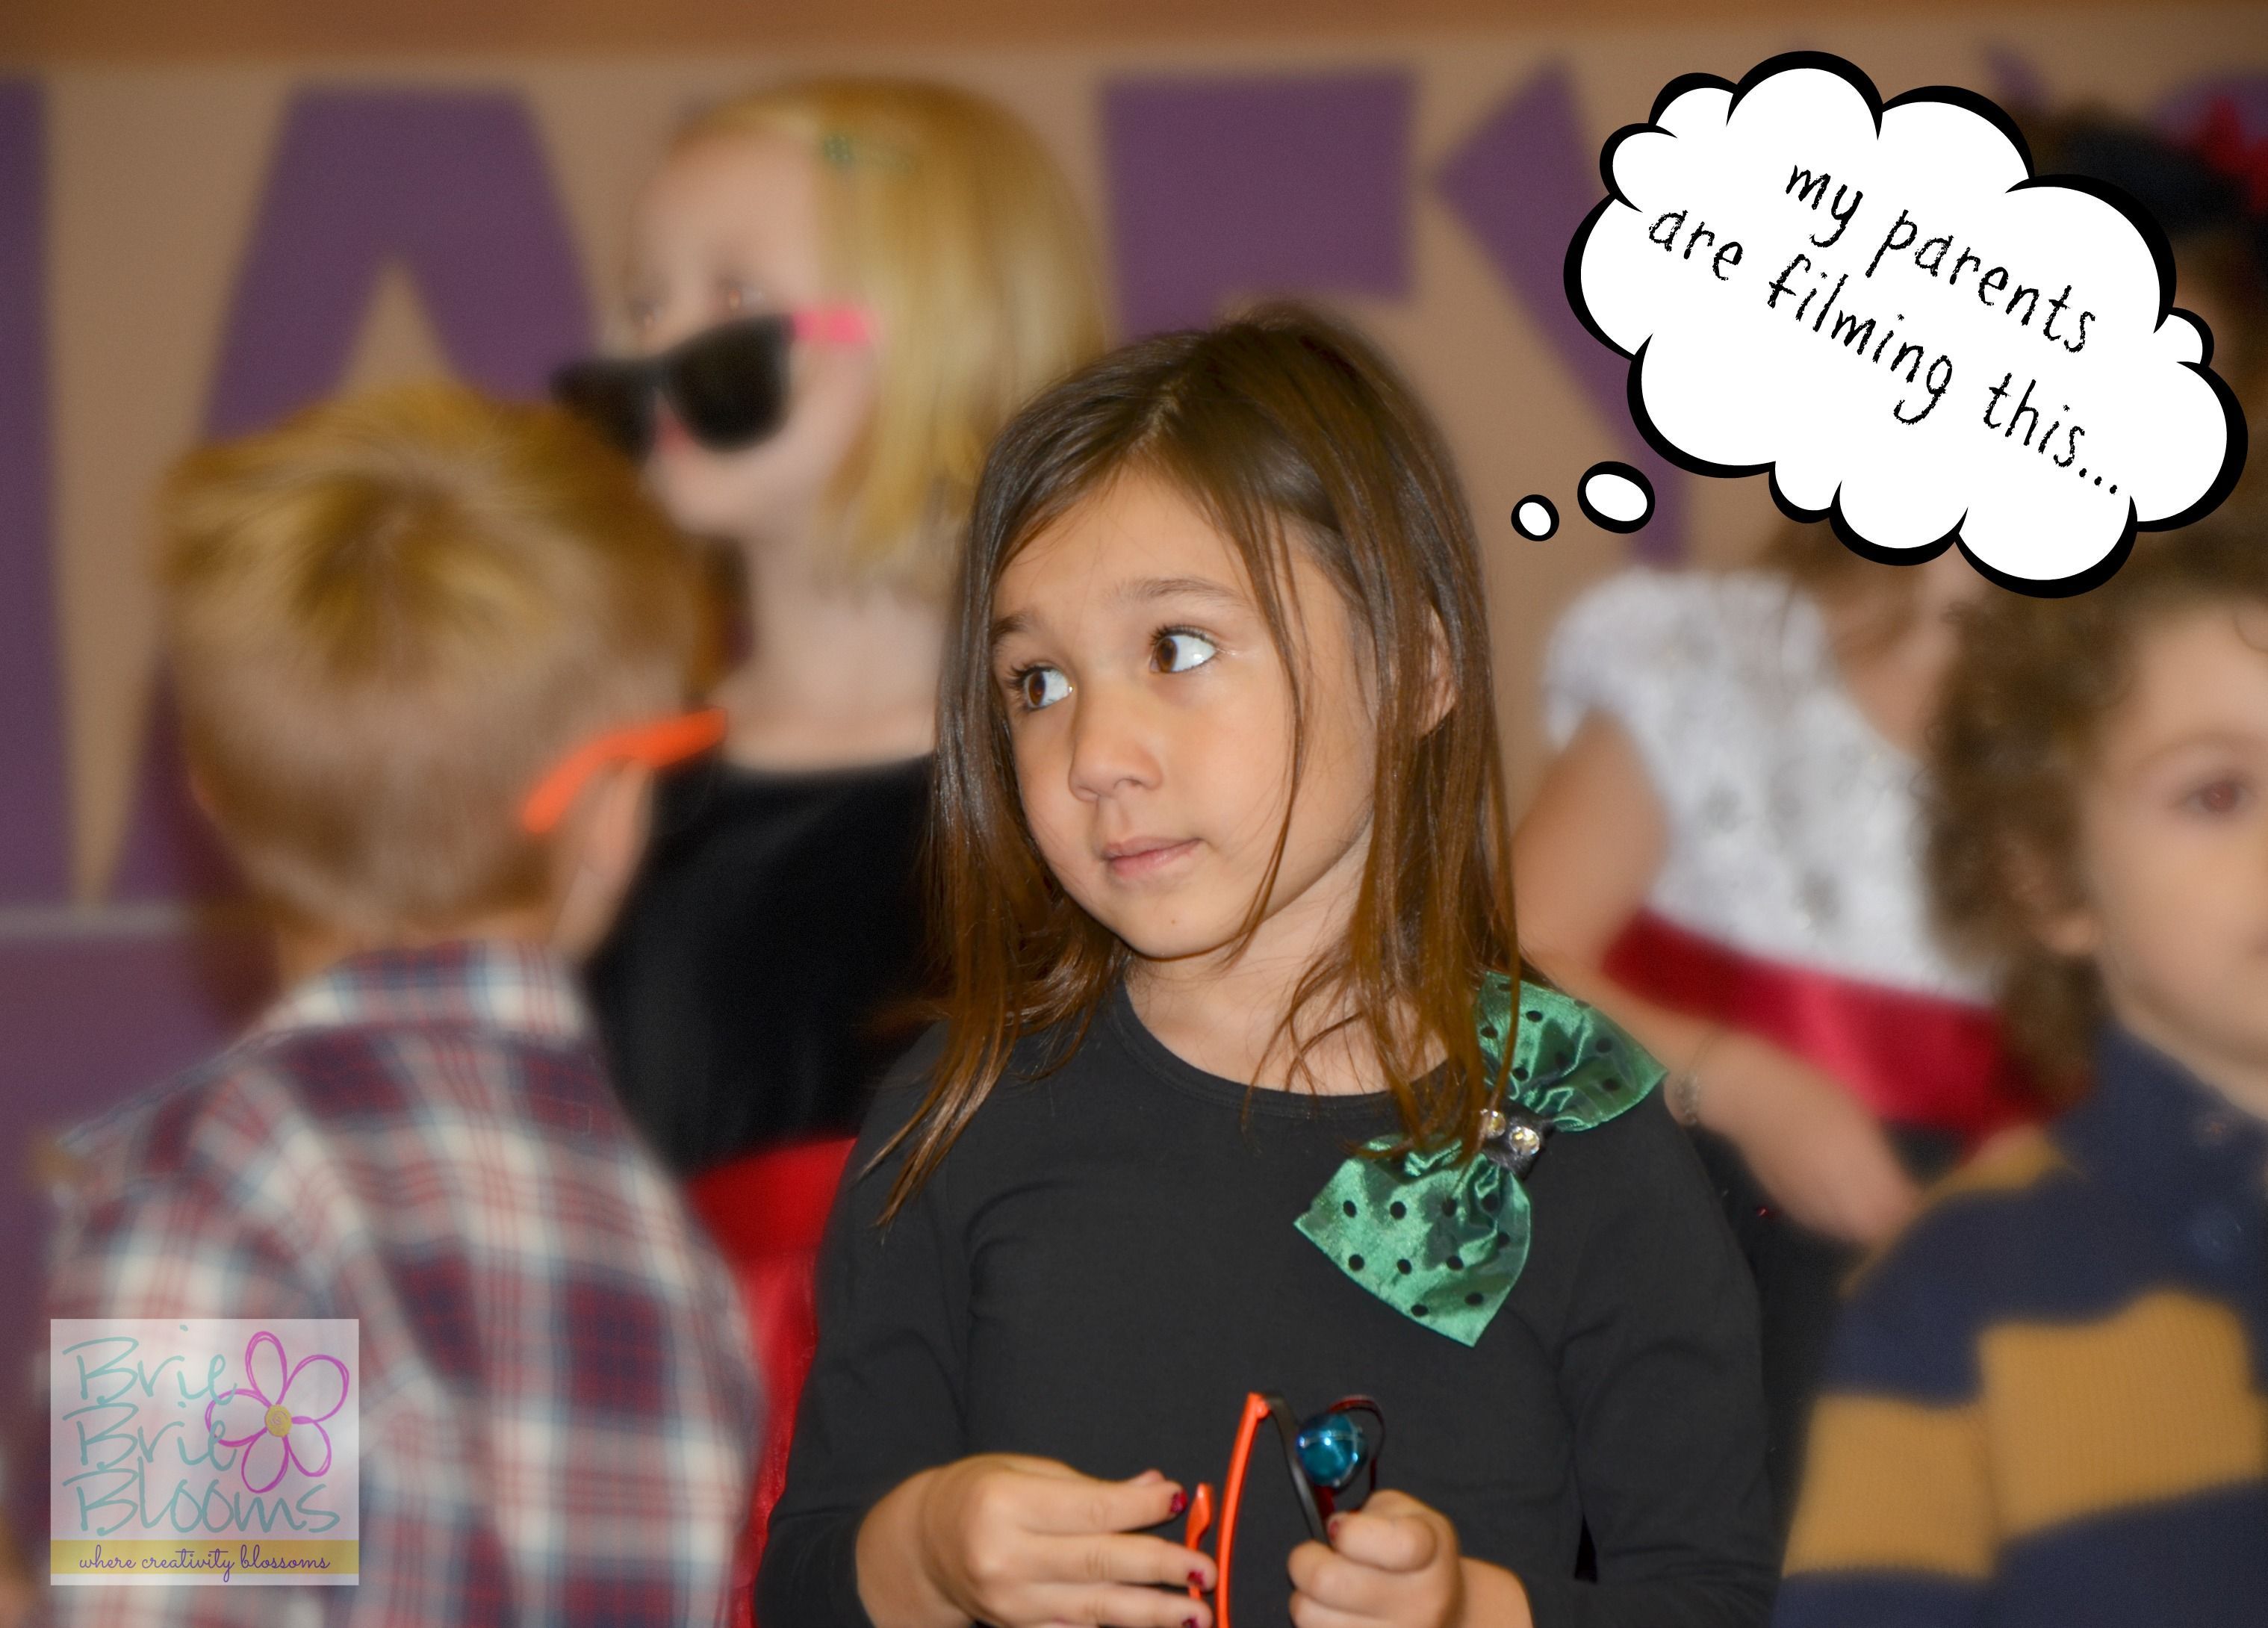 The funny things our kids do during school holiday performances - Brie Brie Blooms -   16 school holiday Funny ideas